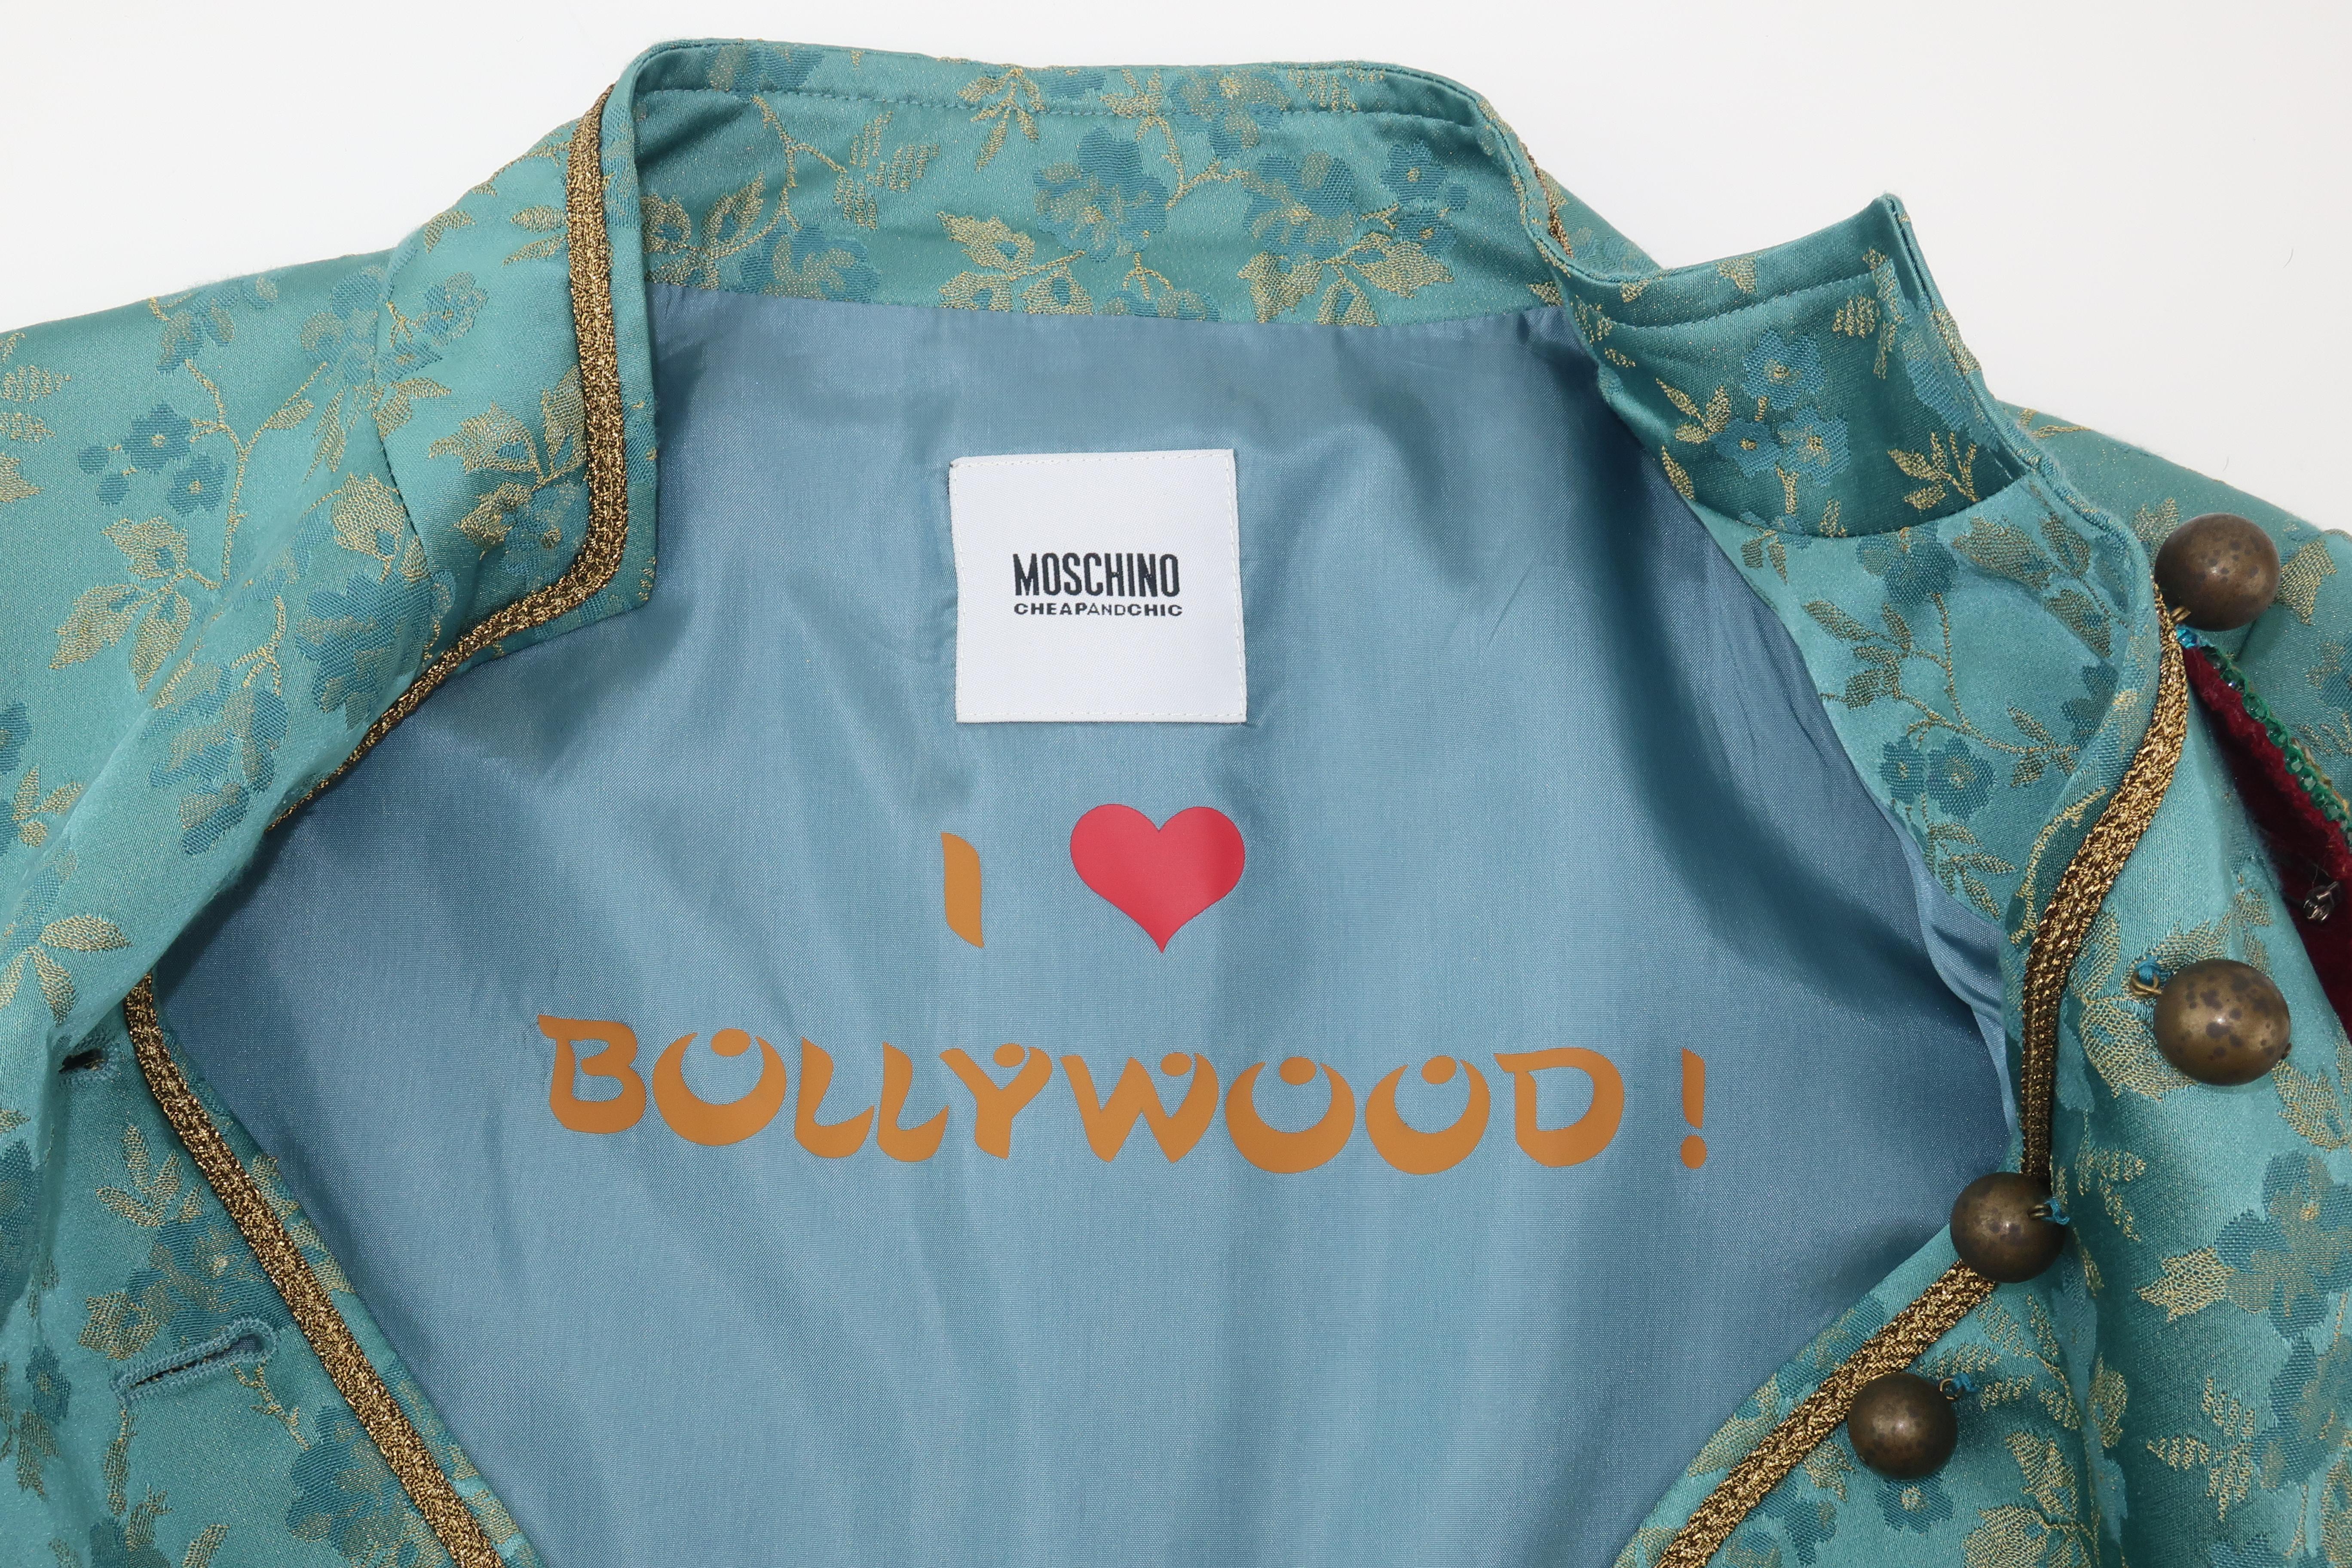 Moschino ‘Bollywood’ Brocade Jacket With Dragonfly Motif 5